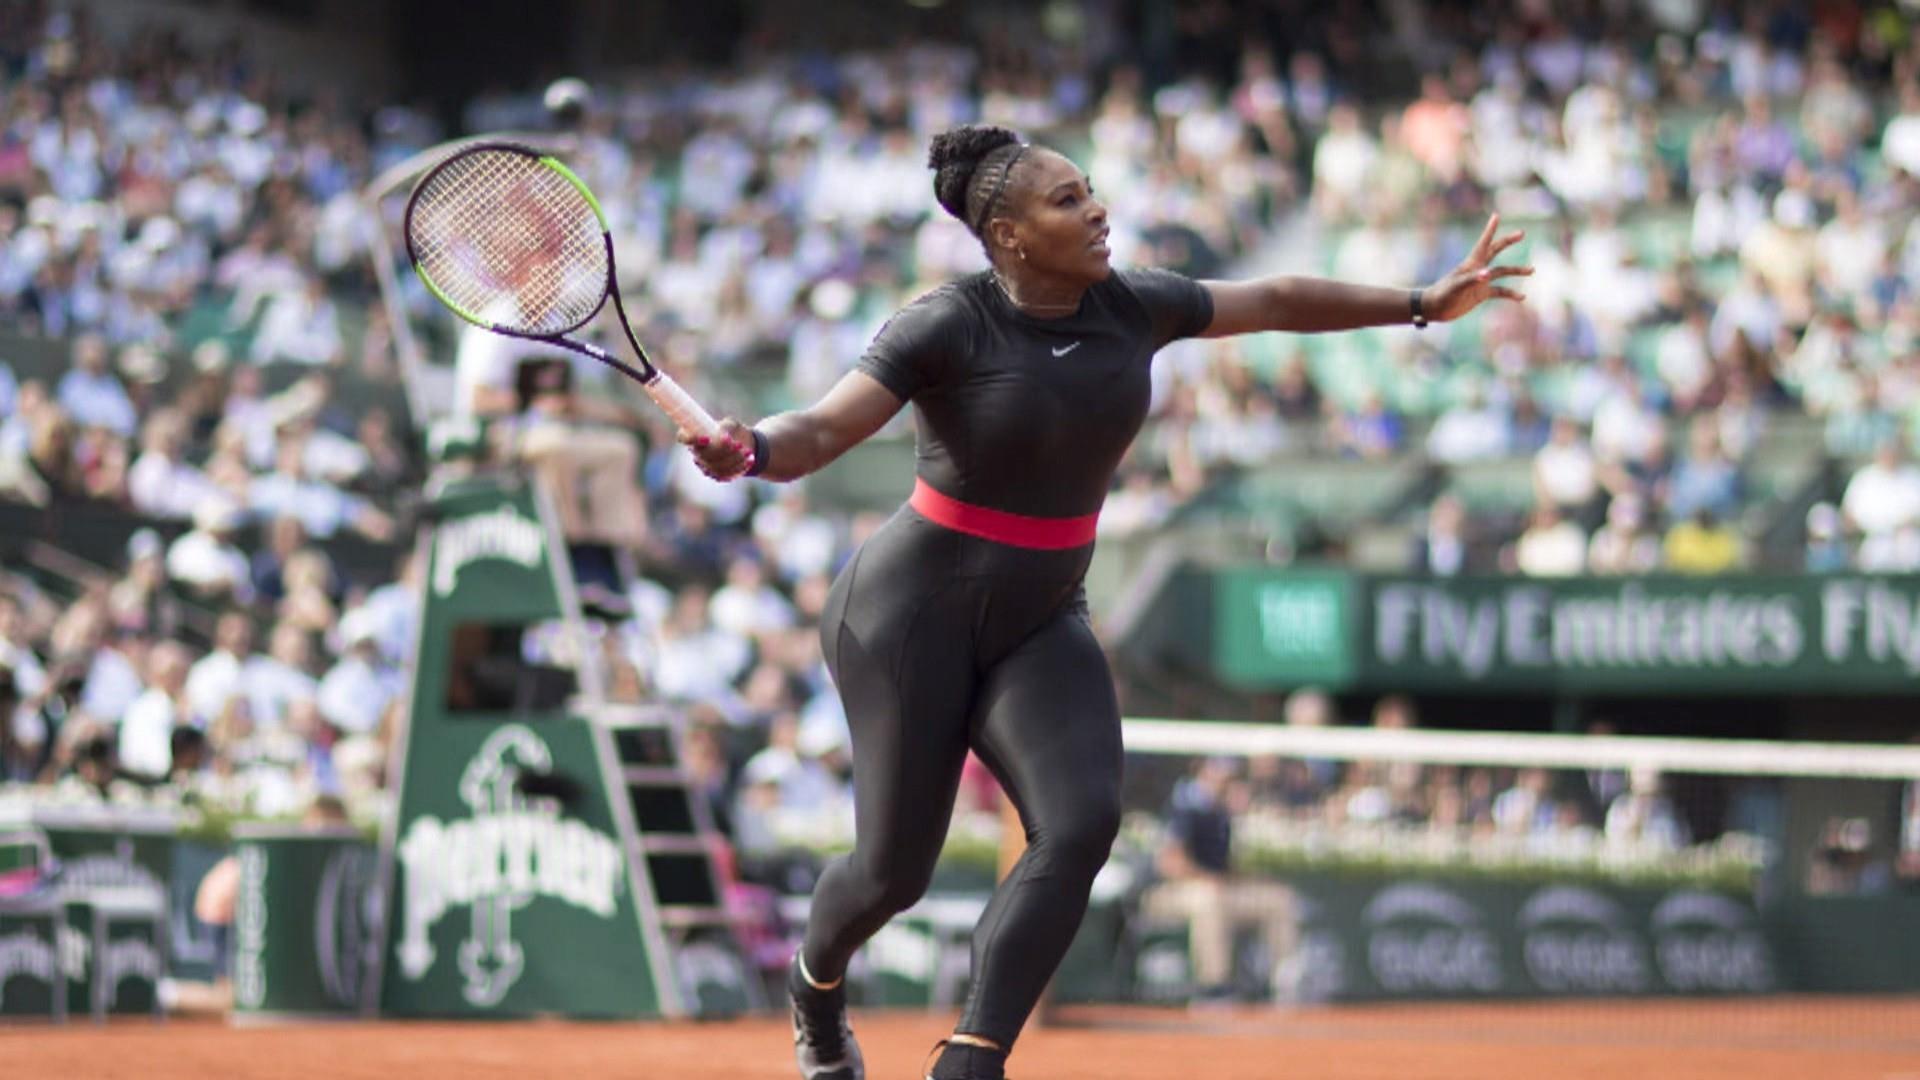 New French Open dress code bans Serena Williams' catsuit